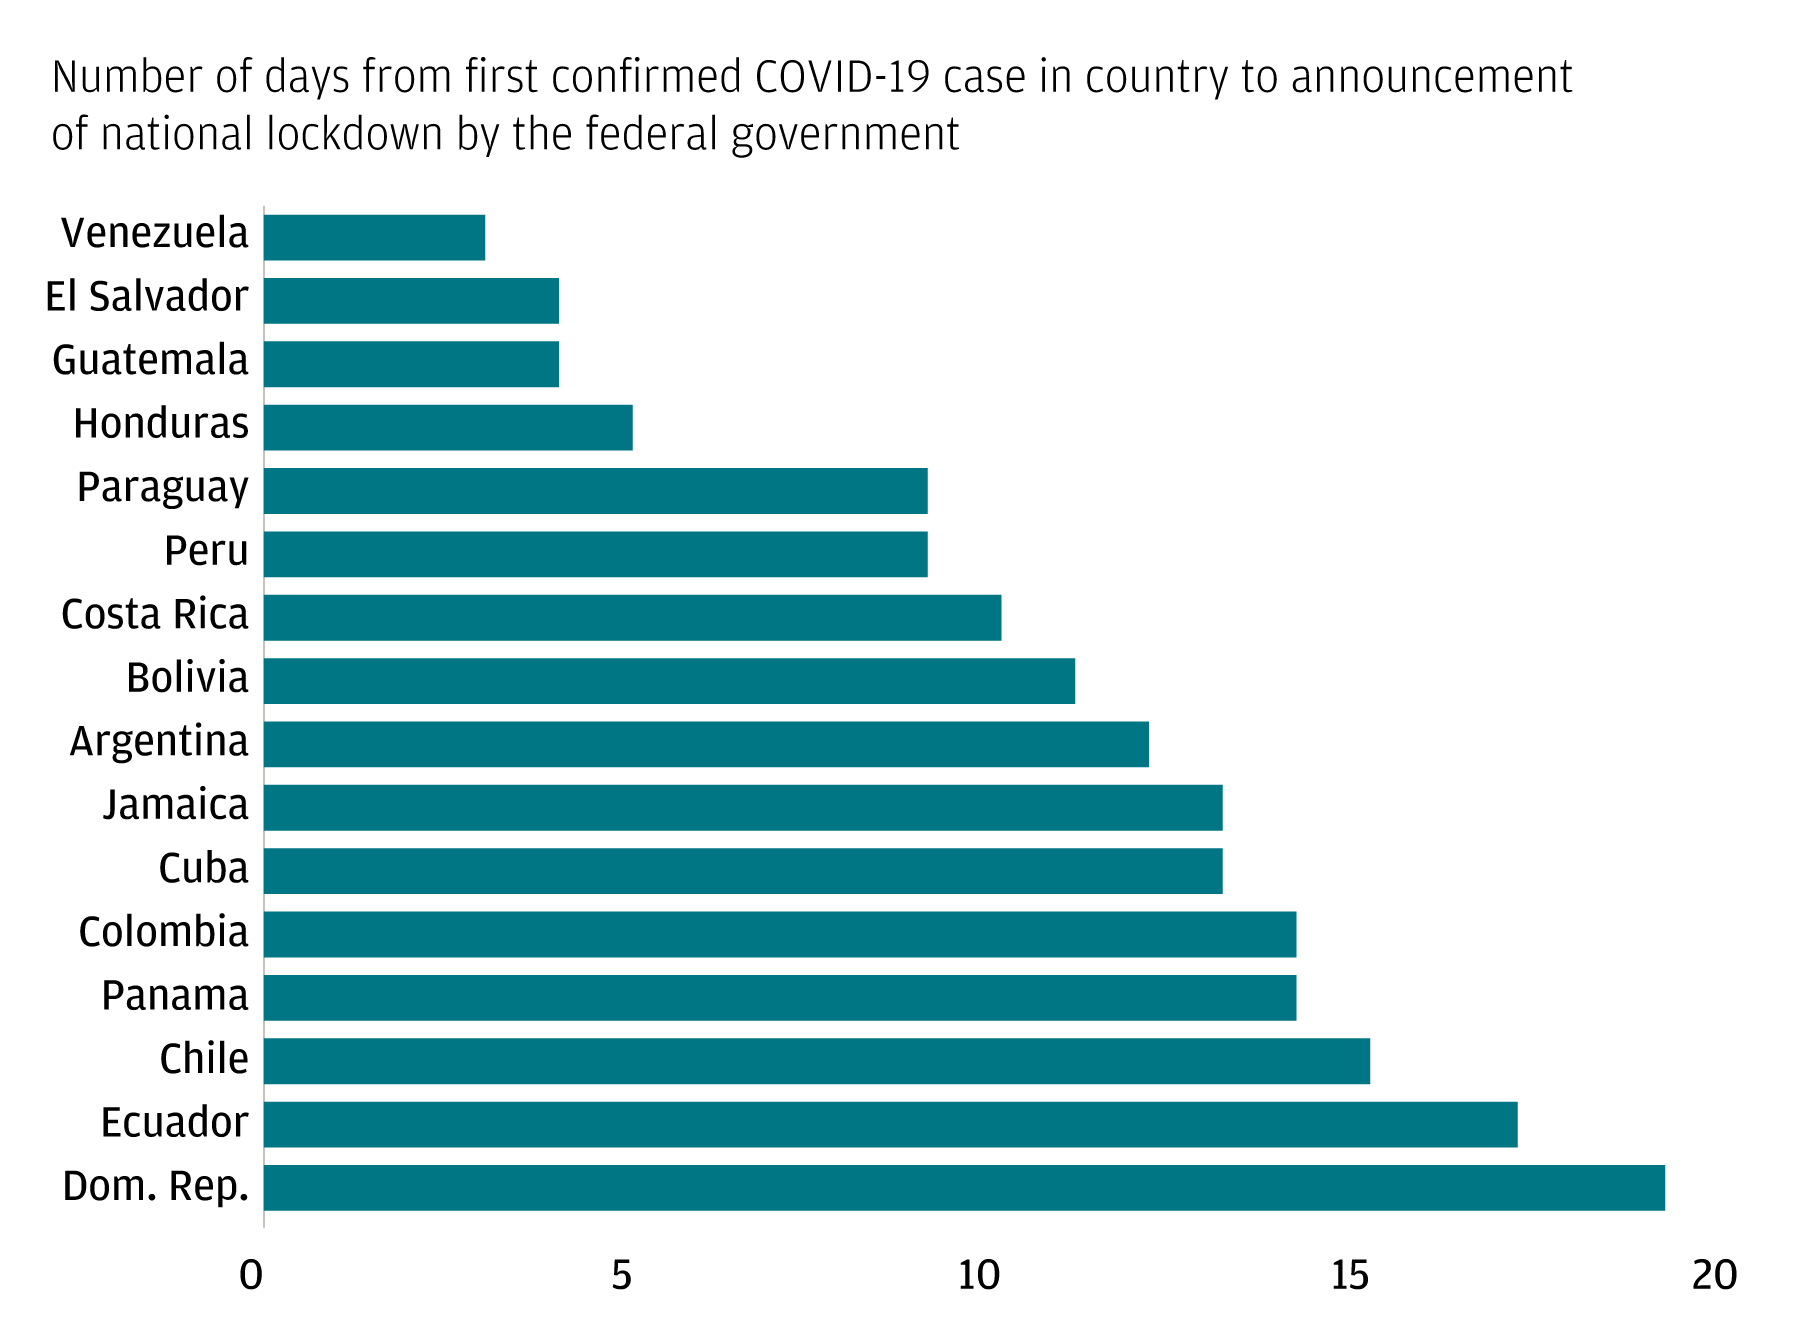 A bar chart showing the timeliness of government response in select economies in Latin America and the Caribbean. The chart shows the number of days from the first confirmed COVID-19 case in these countries to the announcement of a national lockdown by th